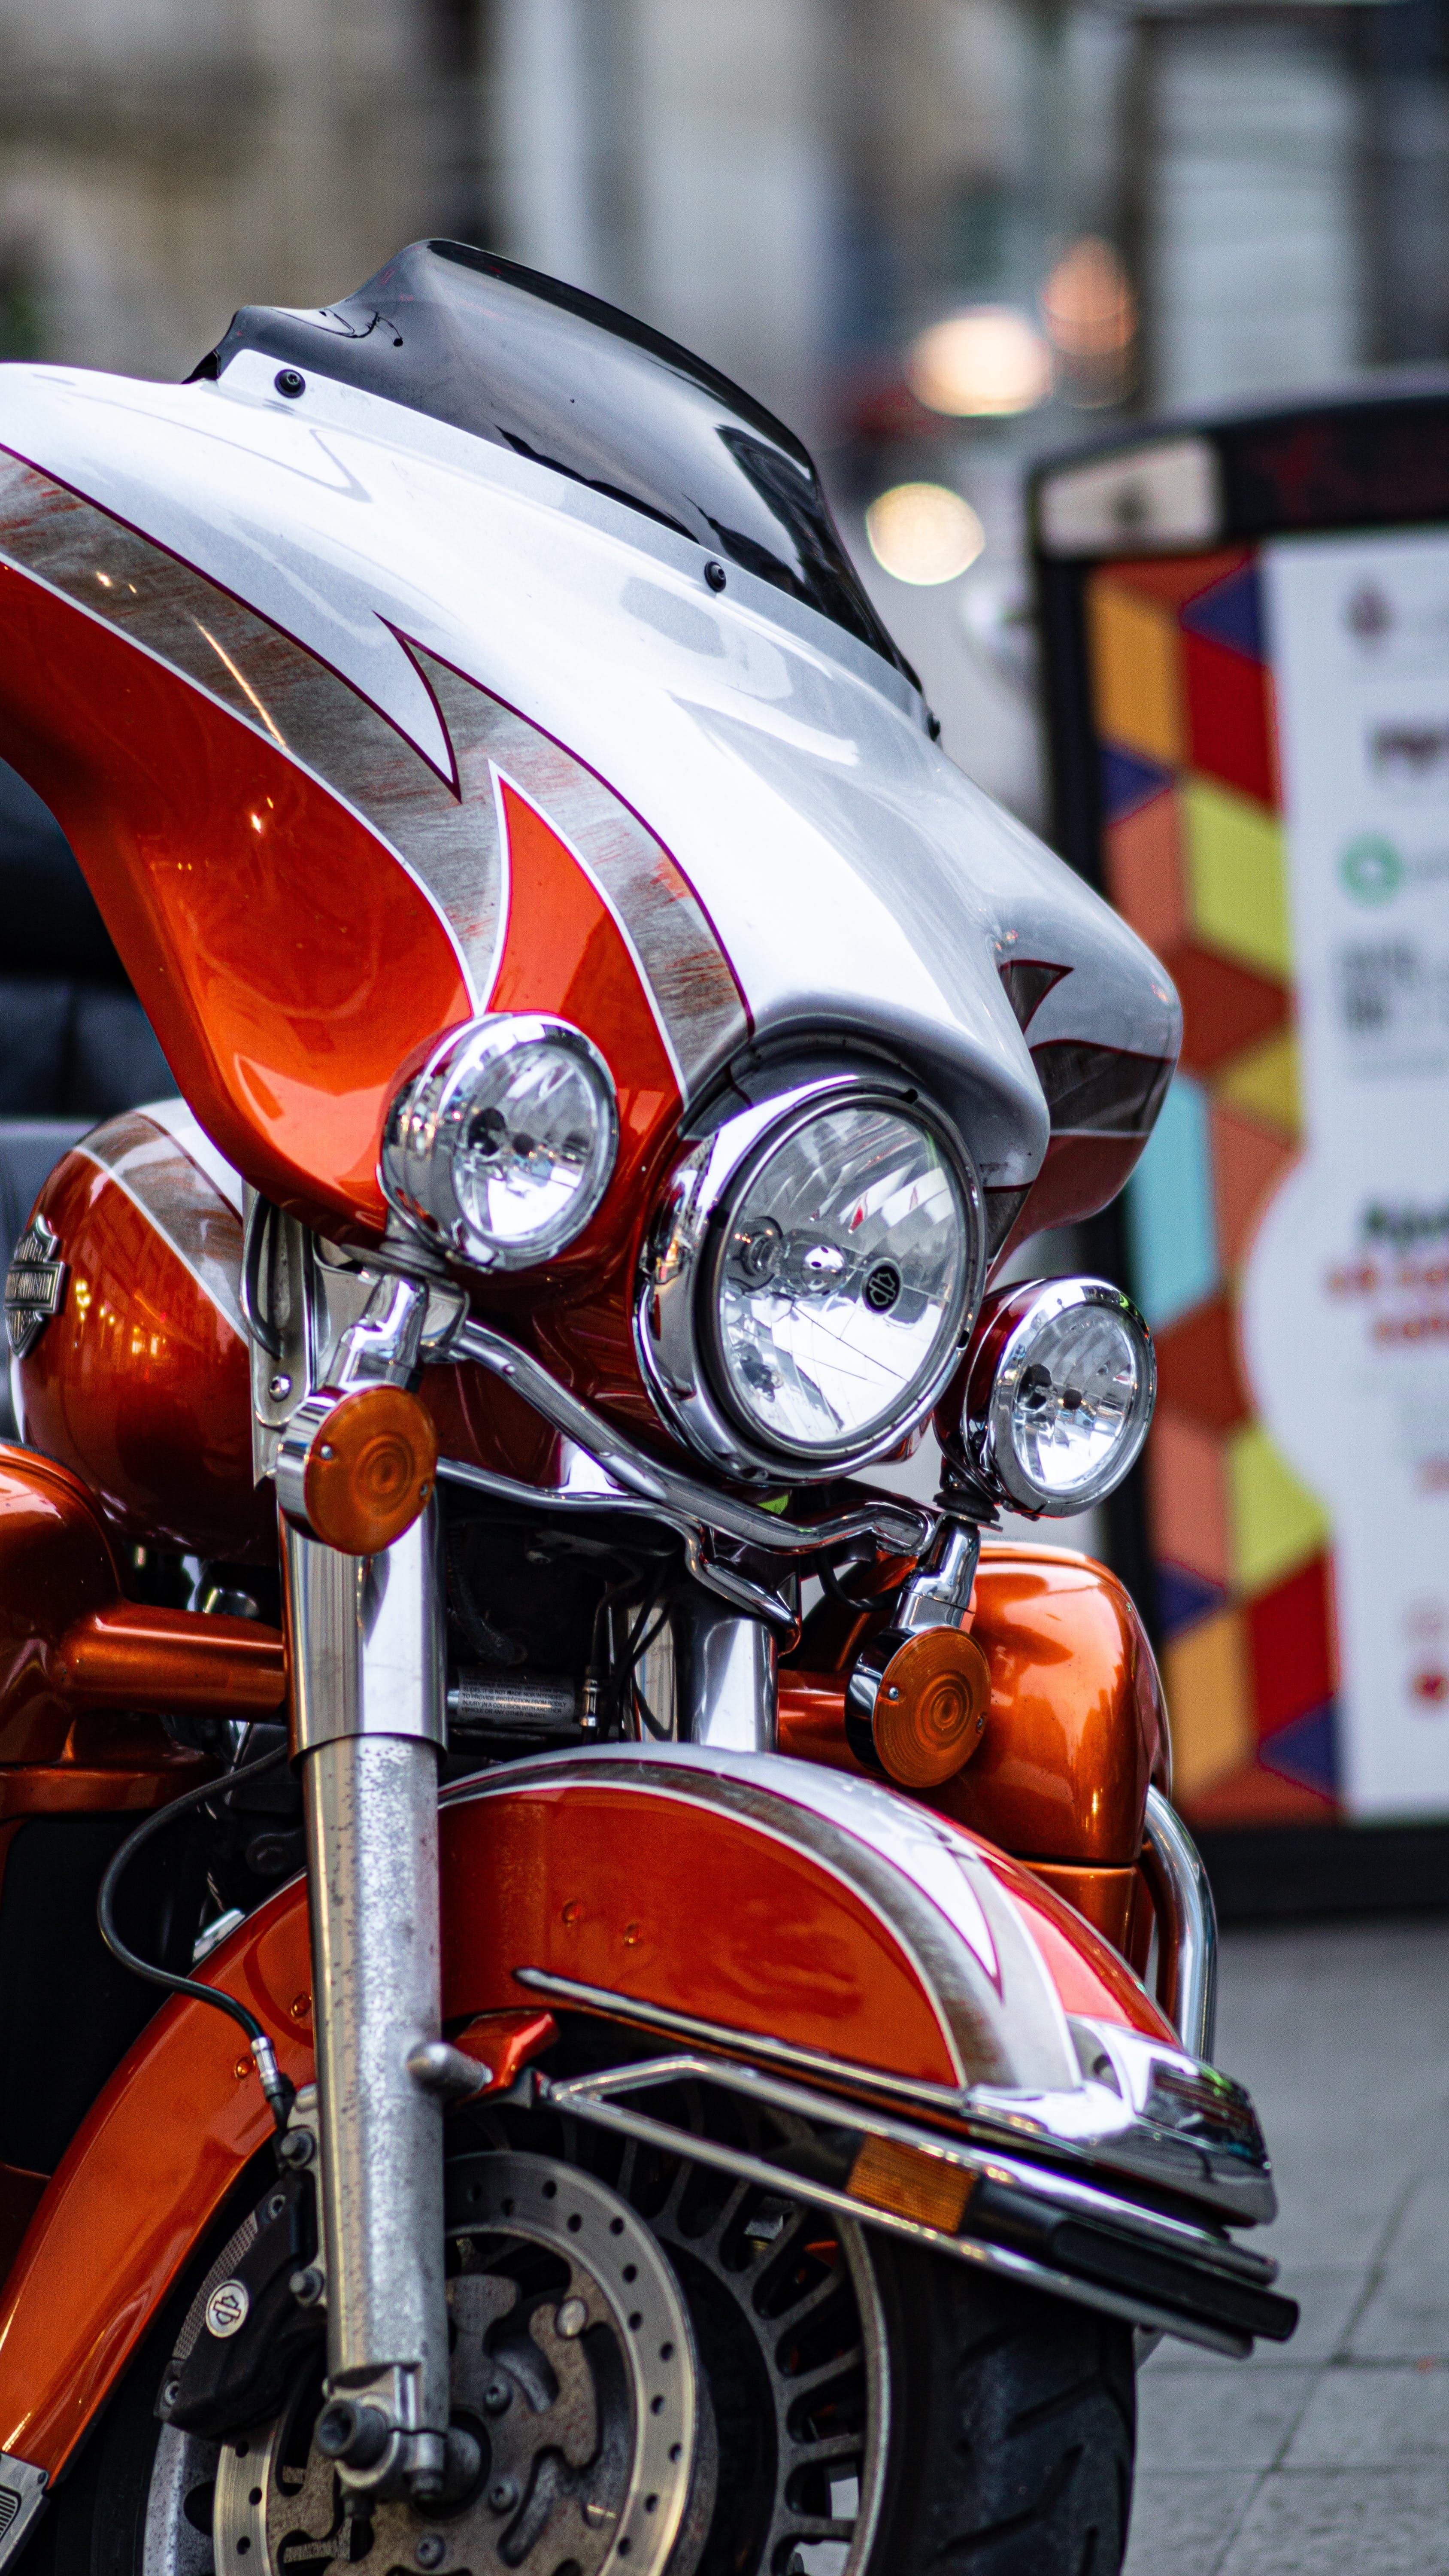 How many Harley Davidson motorcycles are produced each year? 